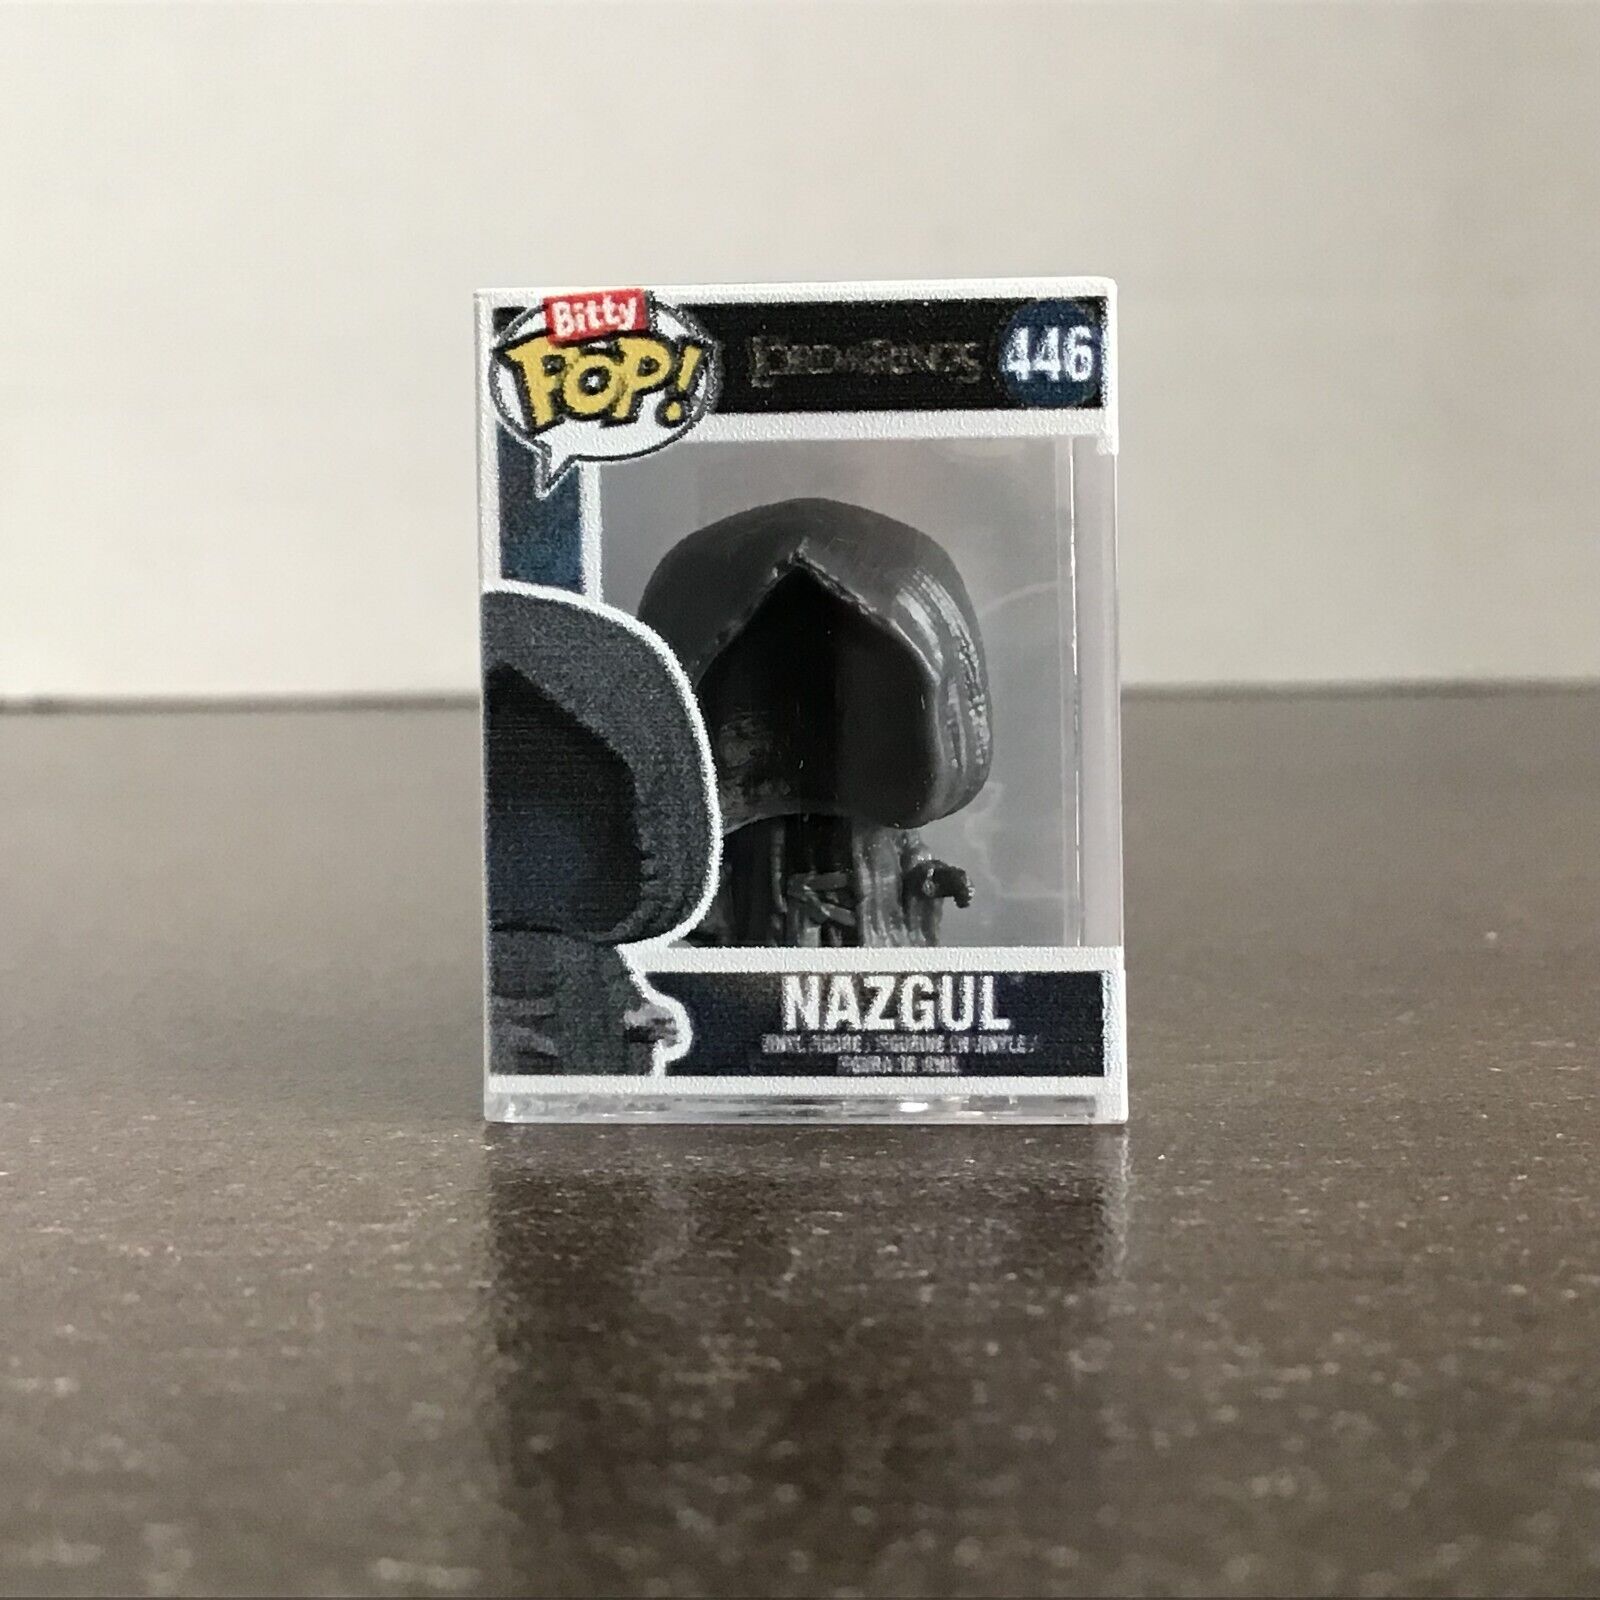 Funko Bitty Pop Lord of the Rings Nazgul Bitty Pop Mystery Chase #446